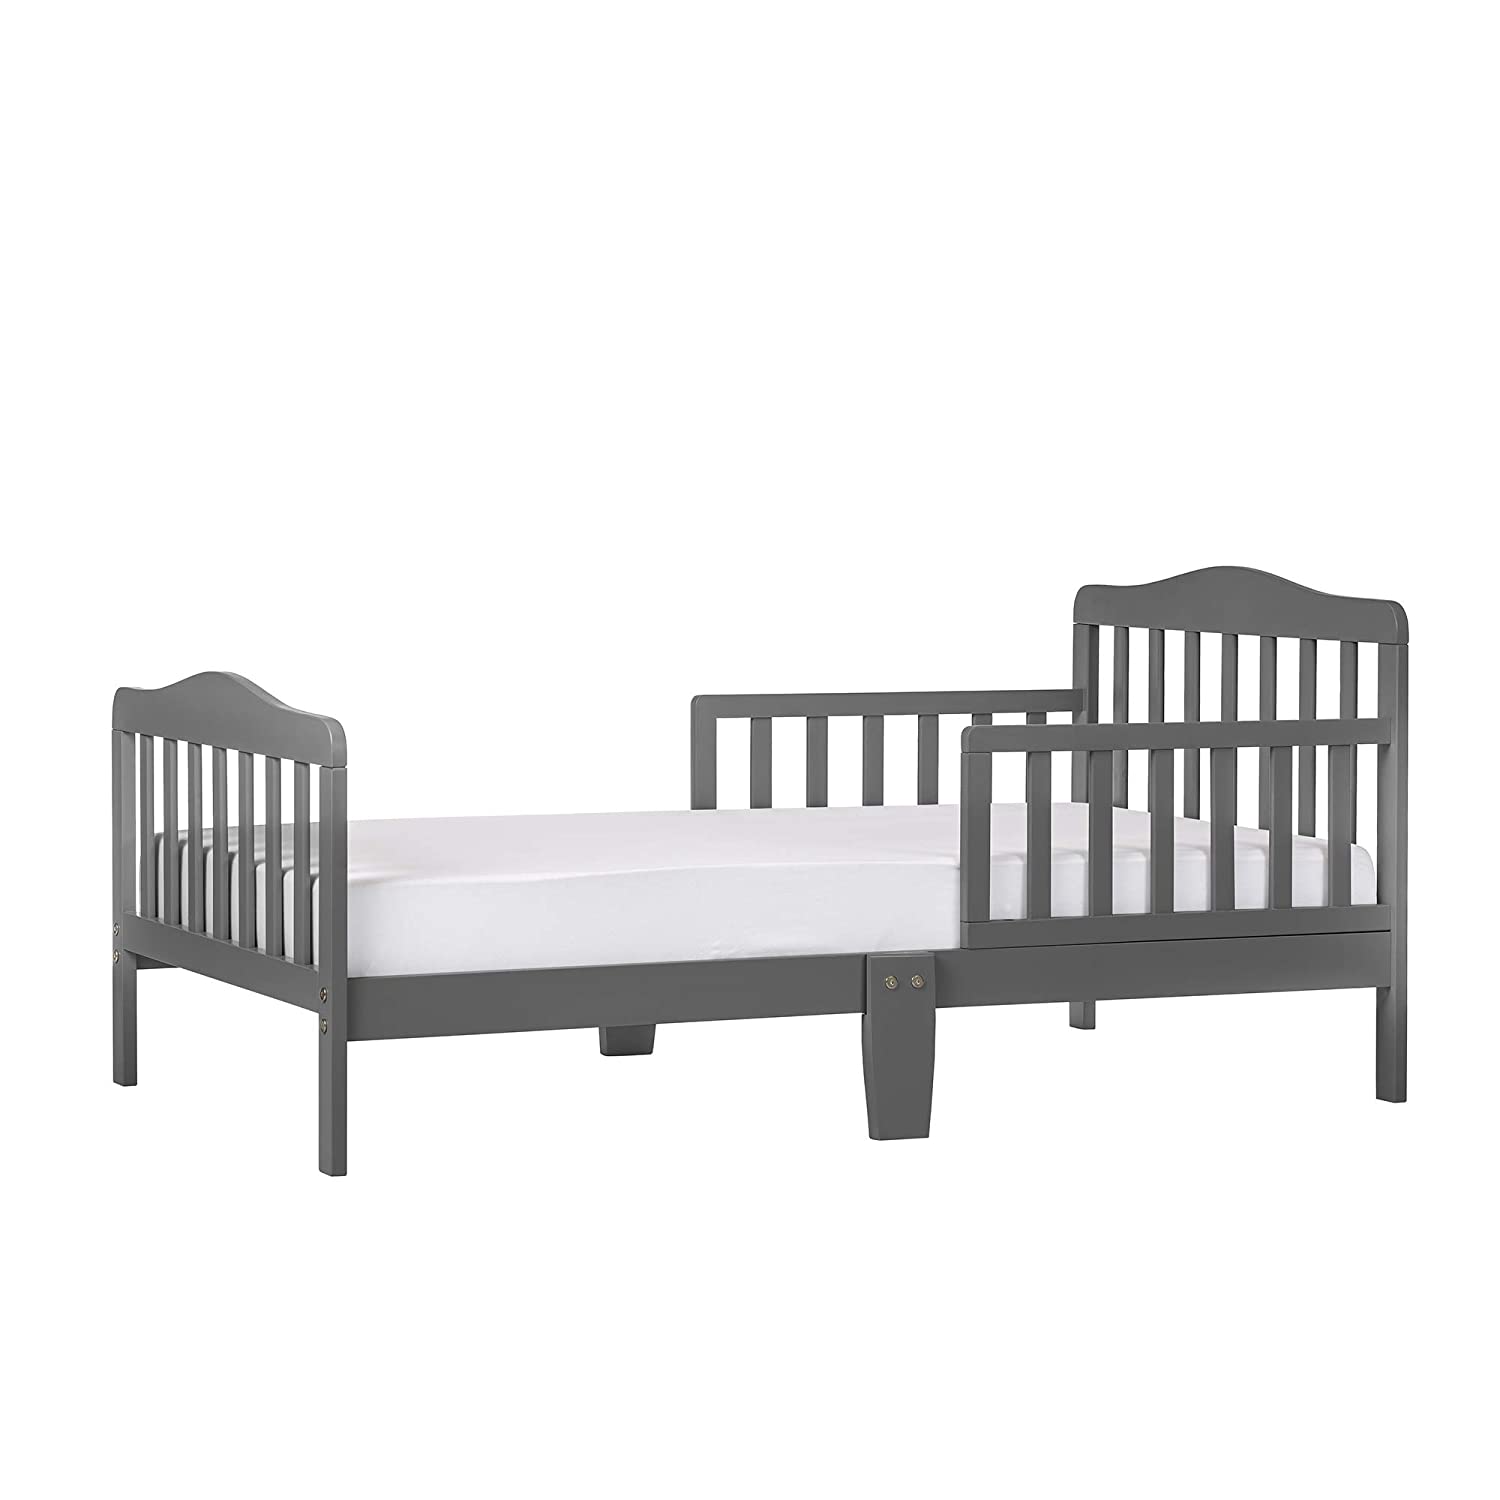 Dream On Me JPMA Certified Toddler Bed